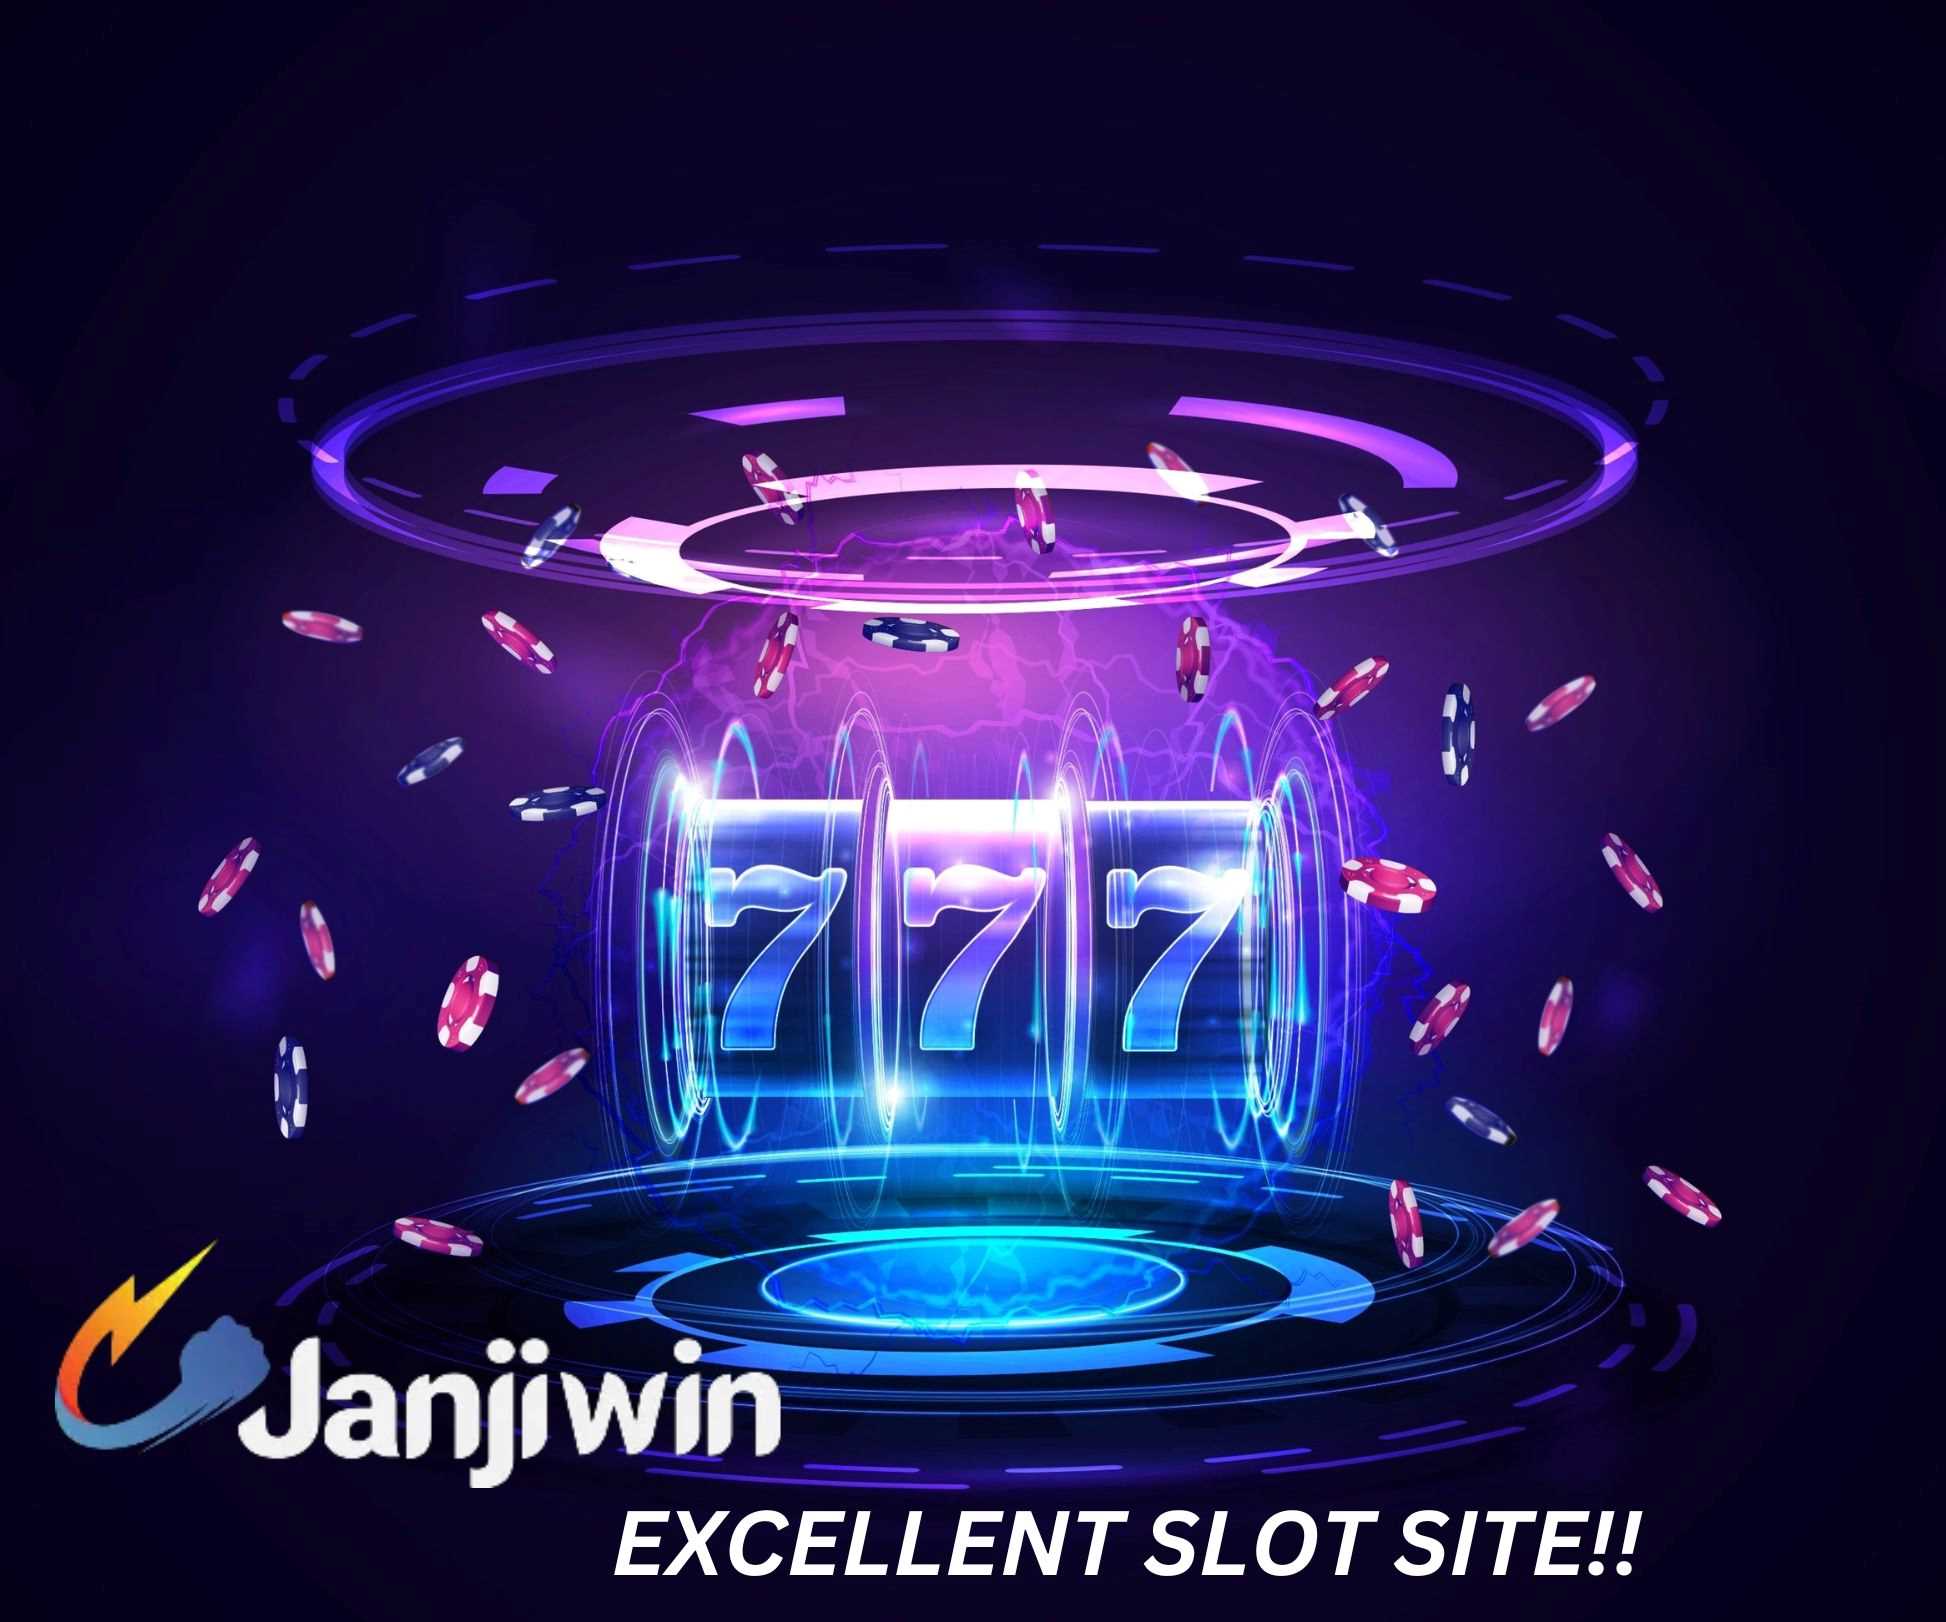 Slot are a machine game that attracts new players